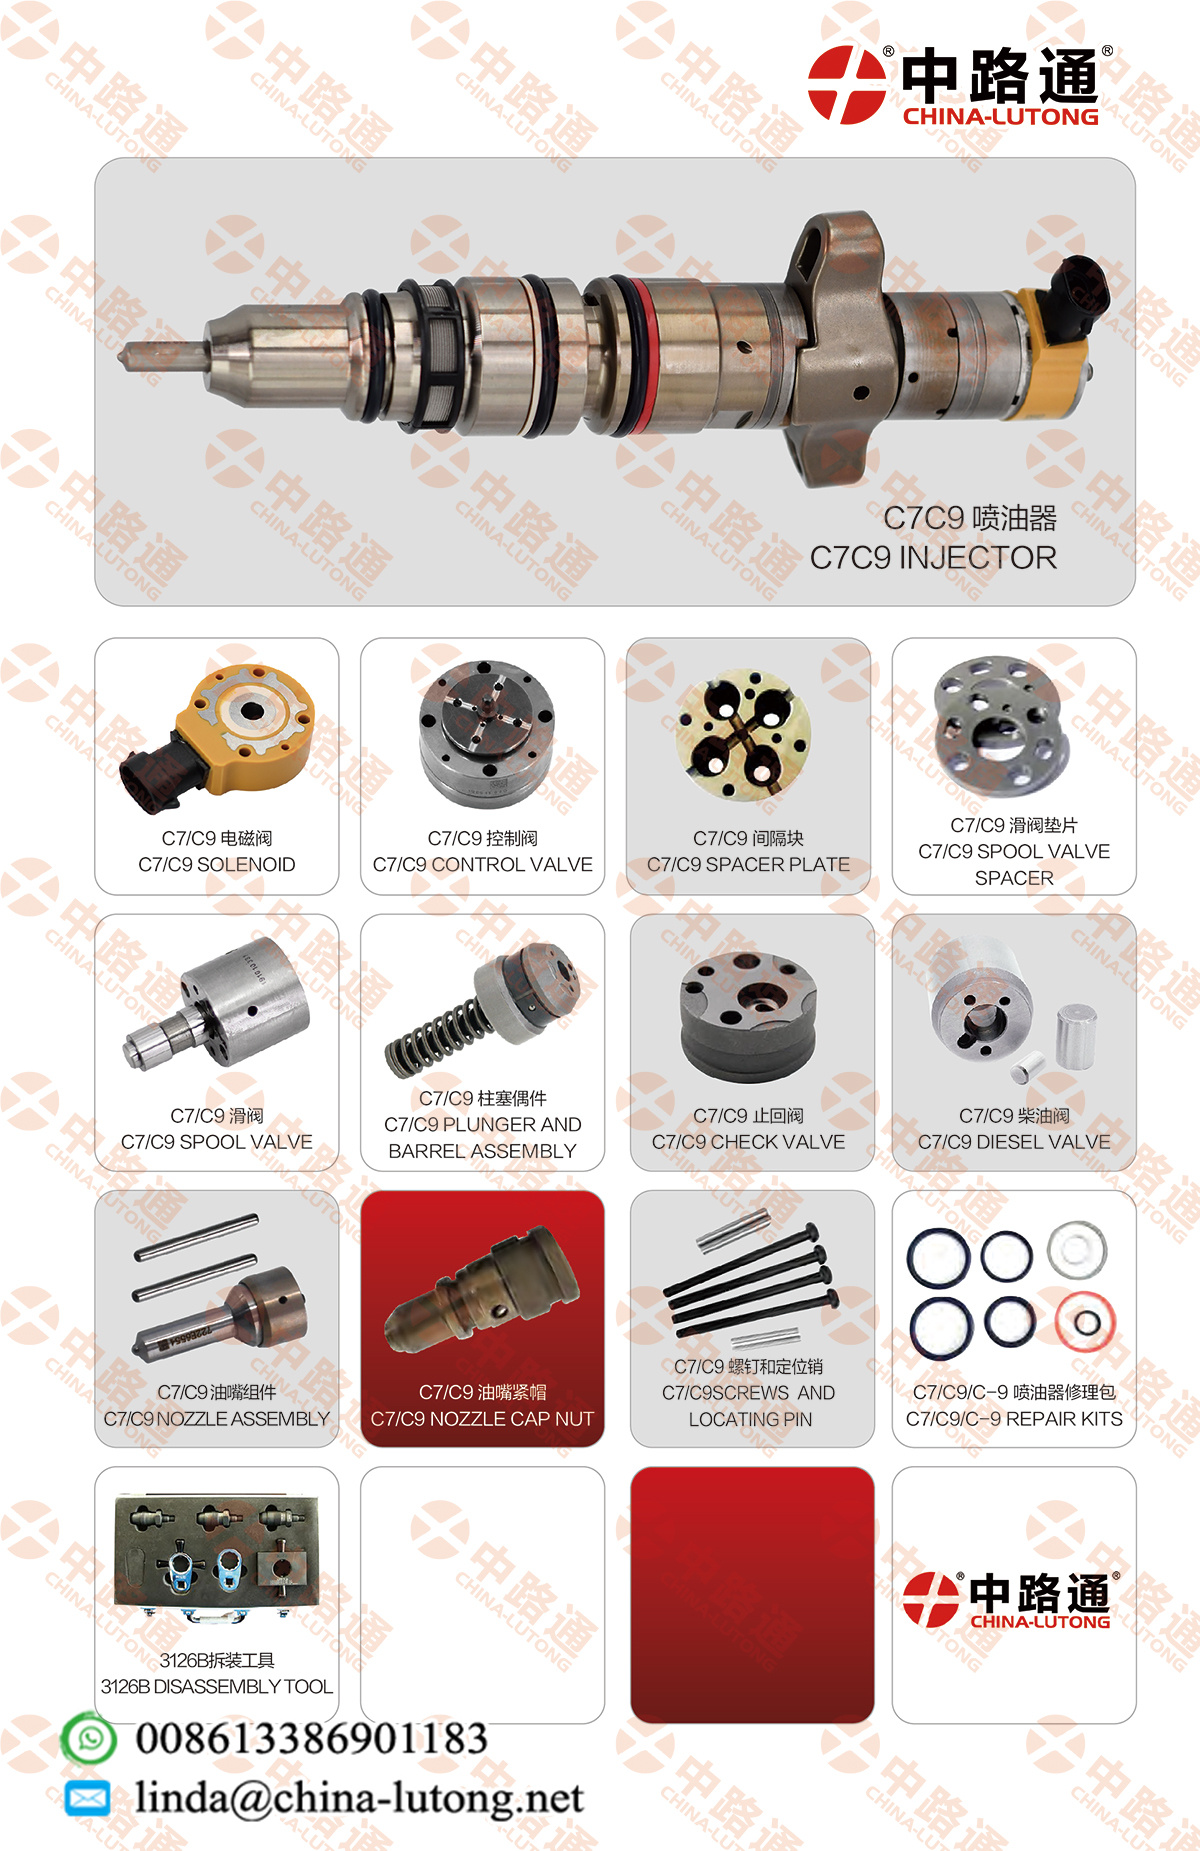 Fit for CAT Fuel Injection Pump Check Valve-Caterpillar Injection Pump Check Valve